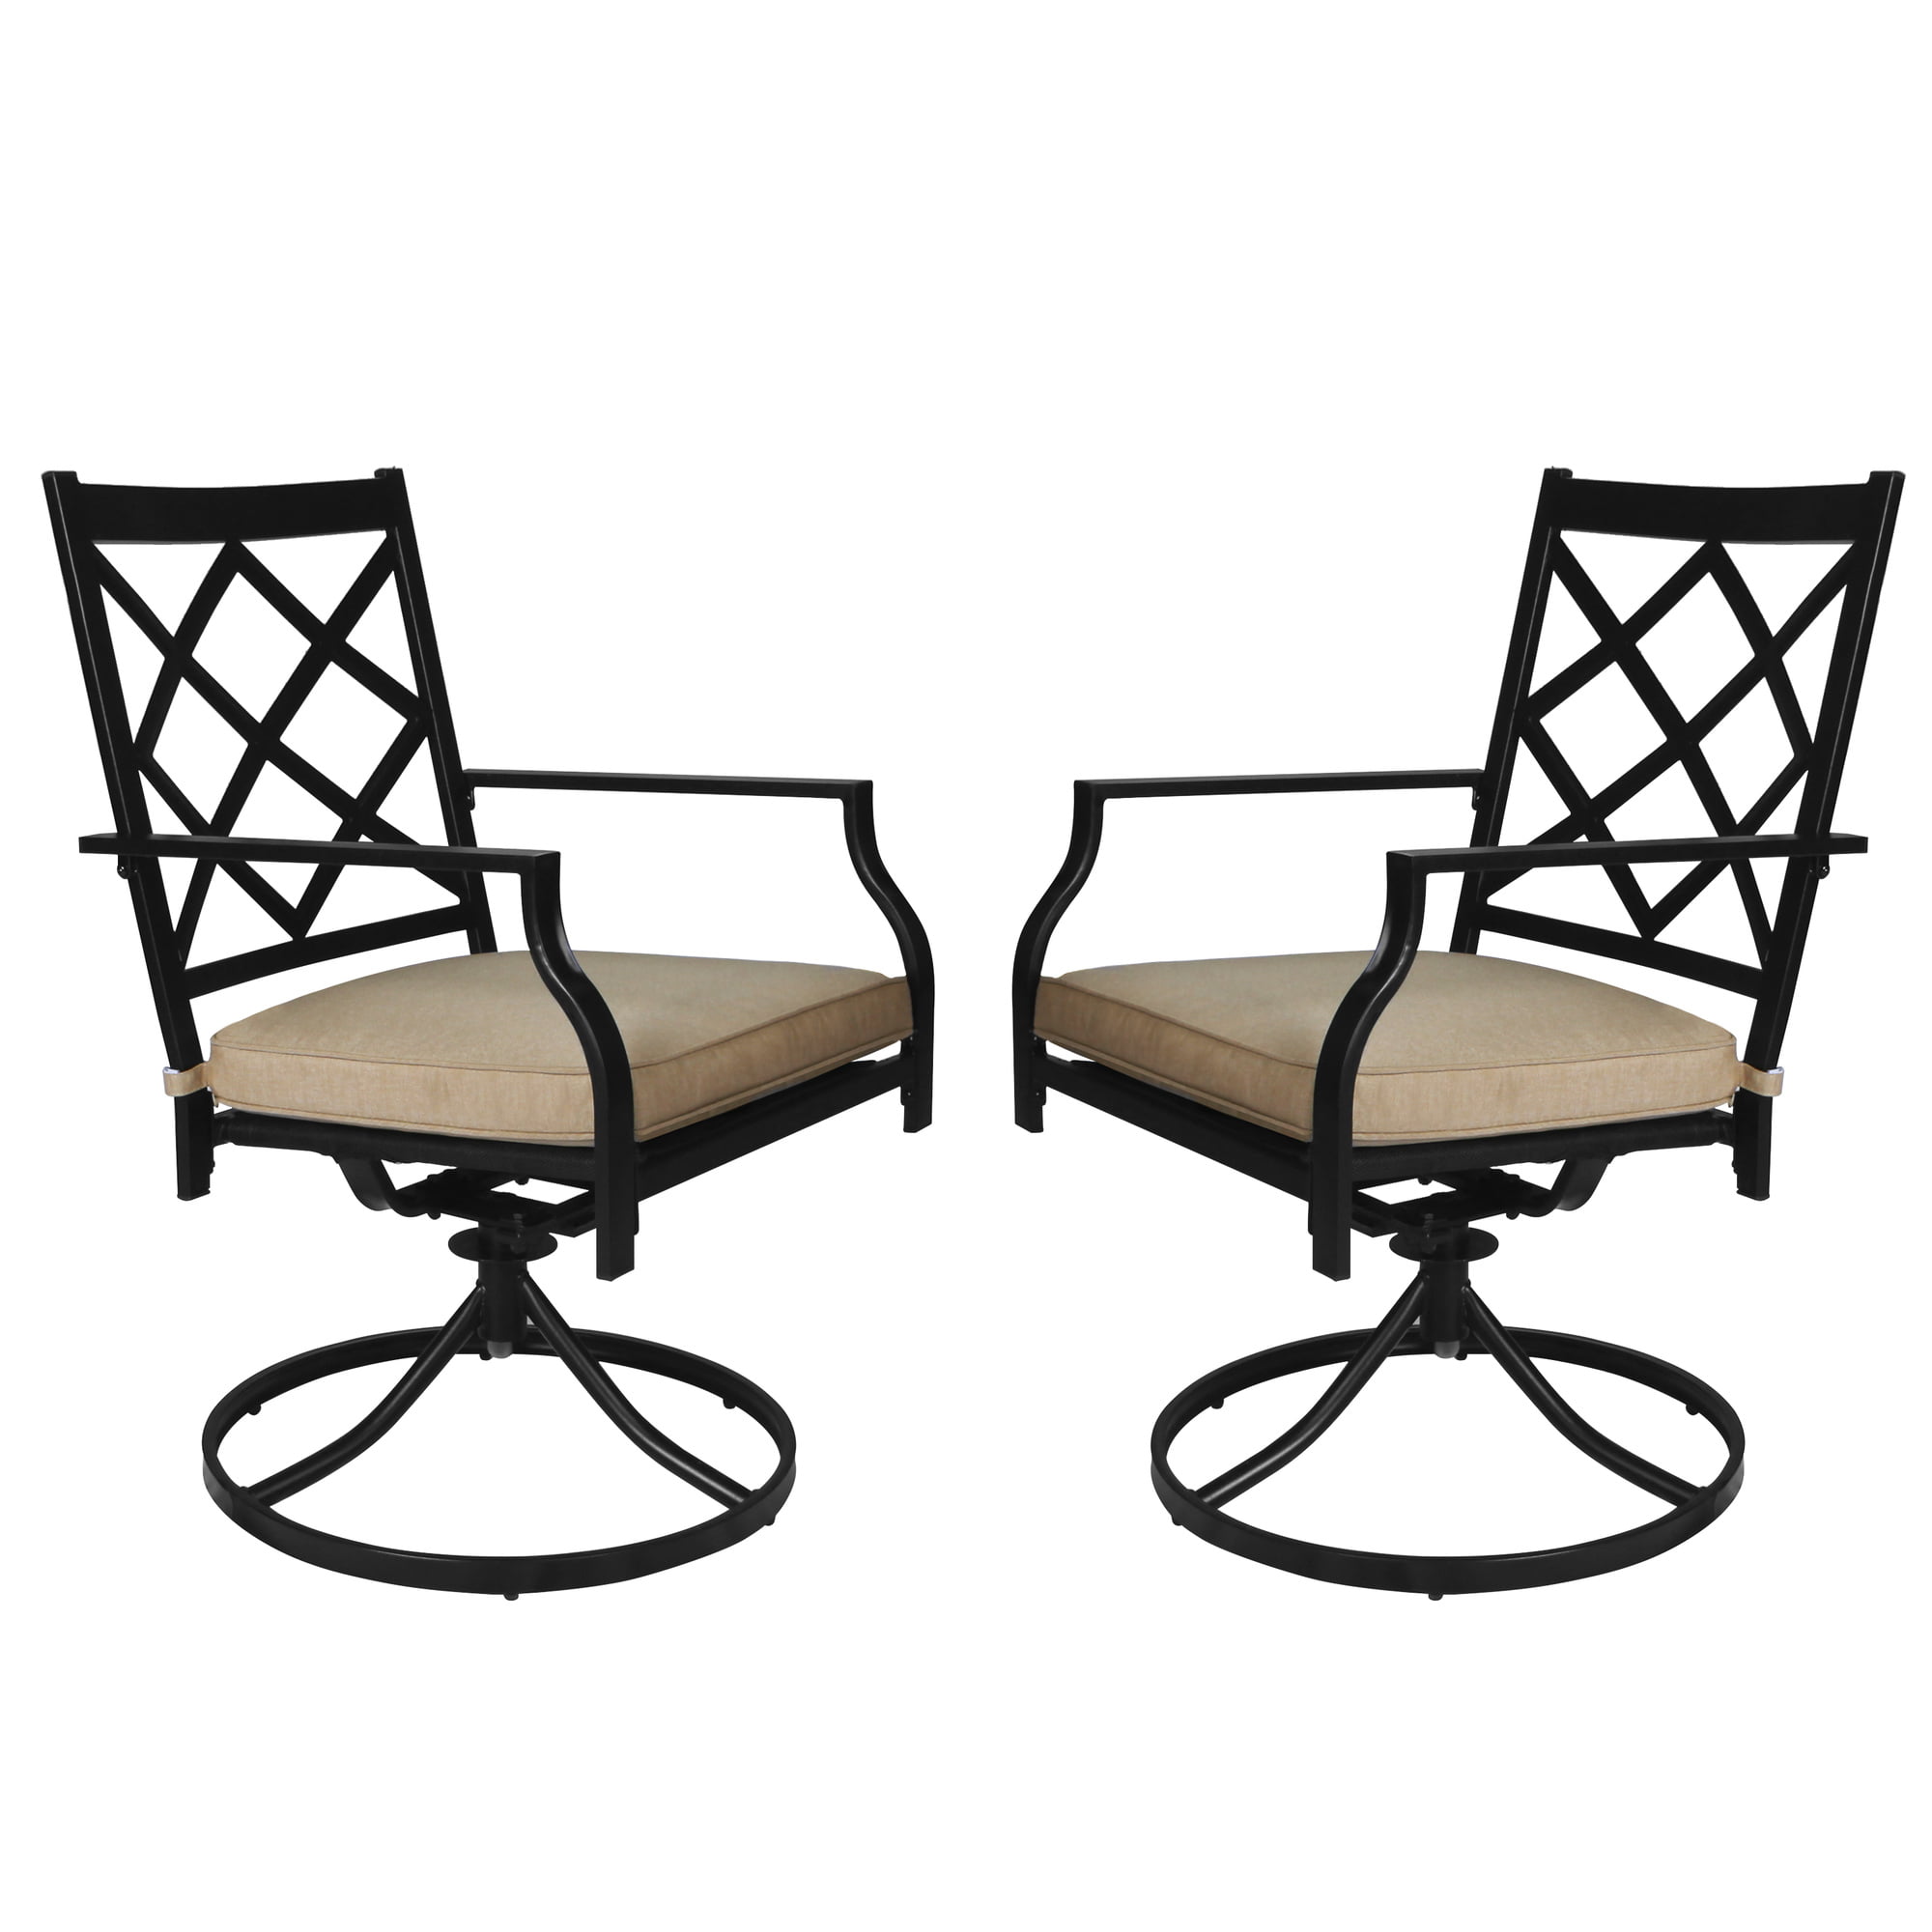 Set of 2 Swivel Dining Chairs Outdoor Patio Deck Seat Furniture Chair Steel Fram 